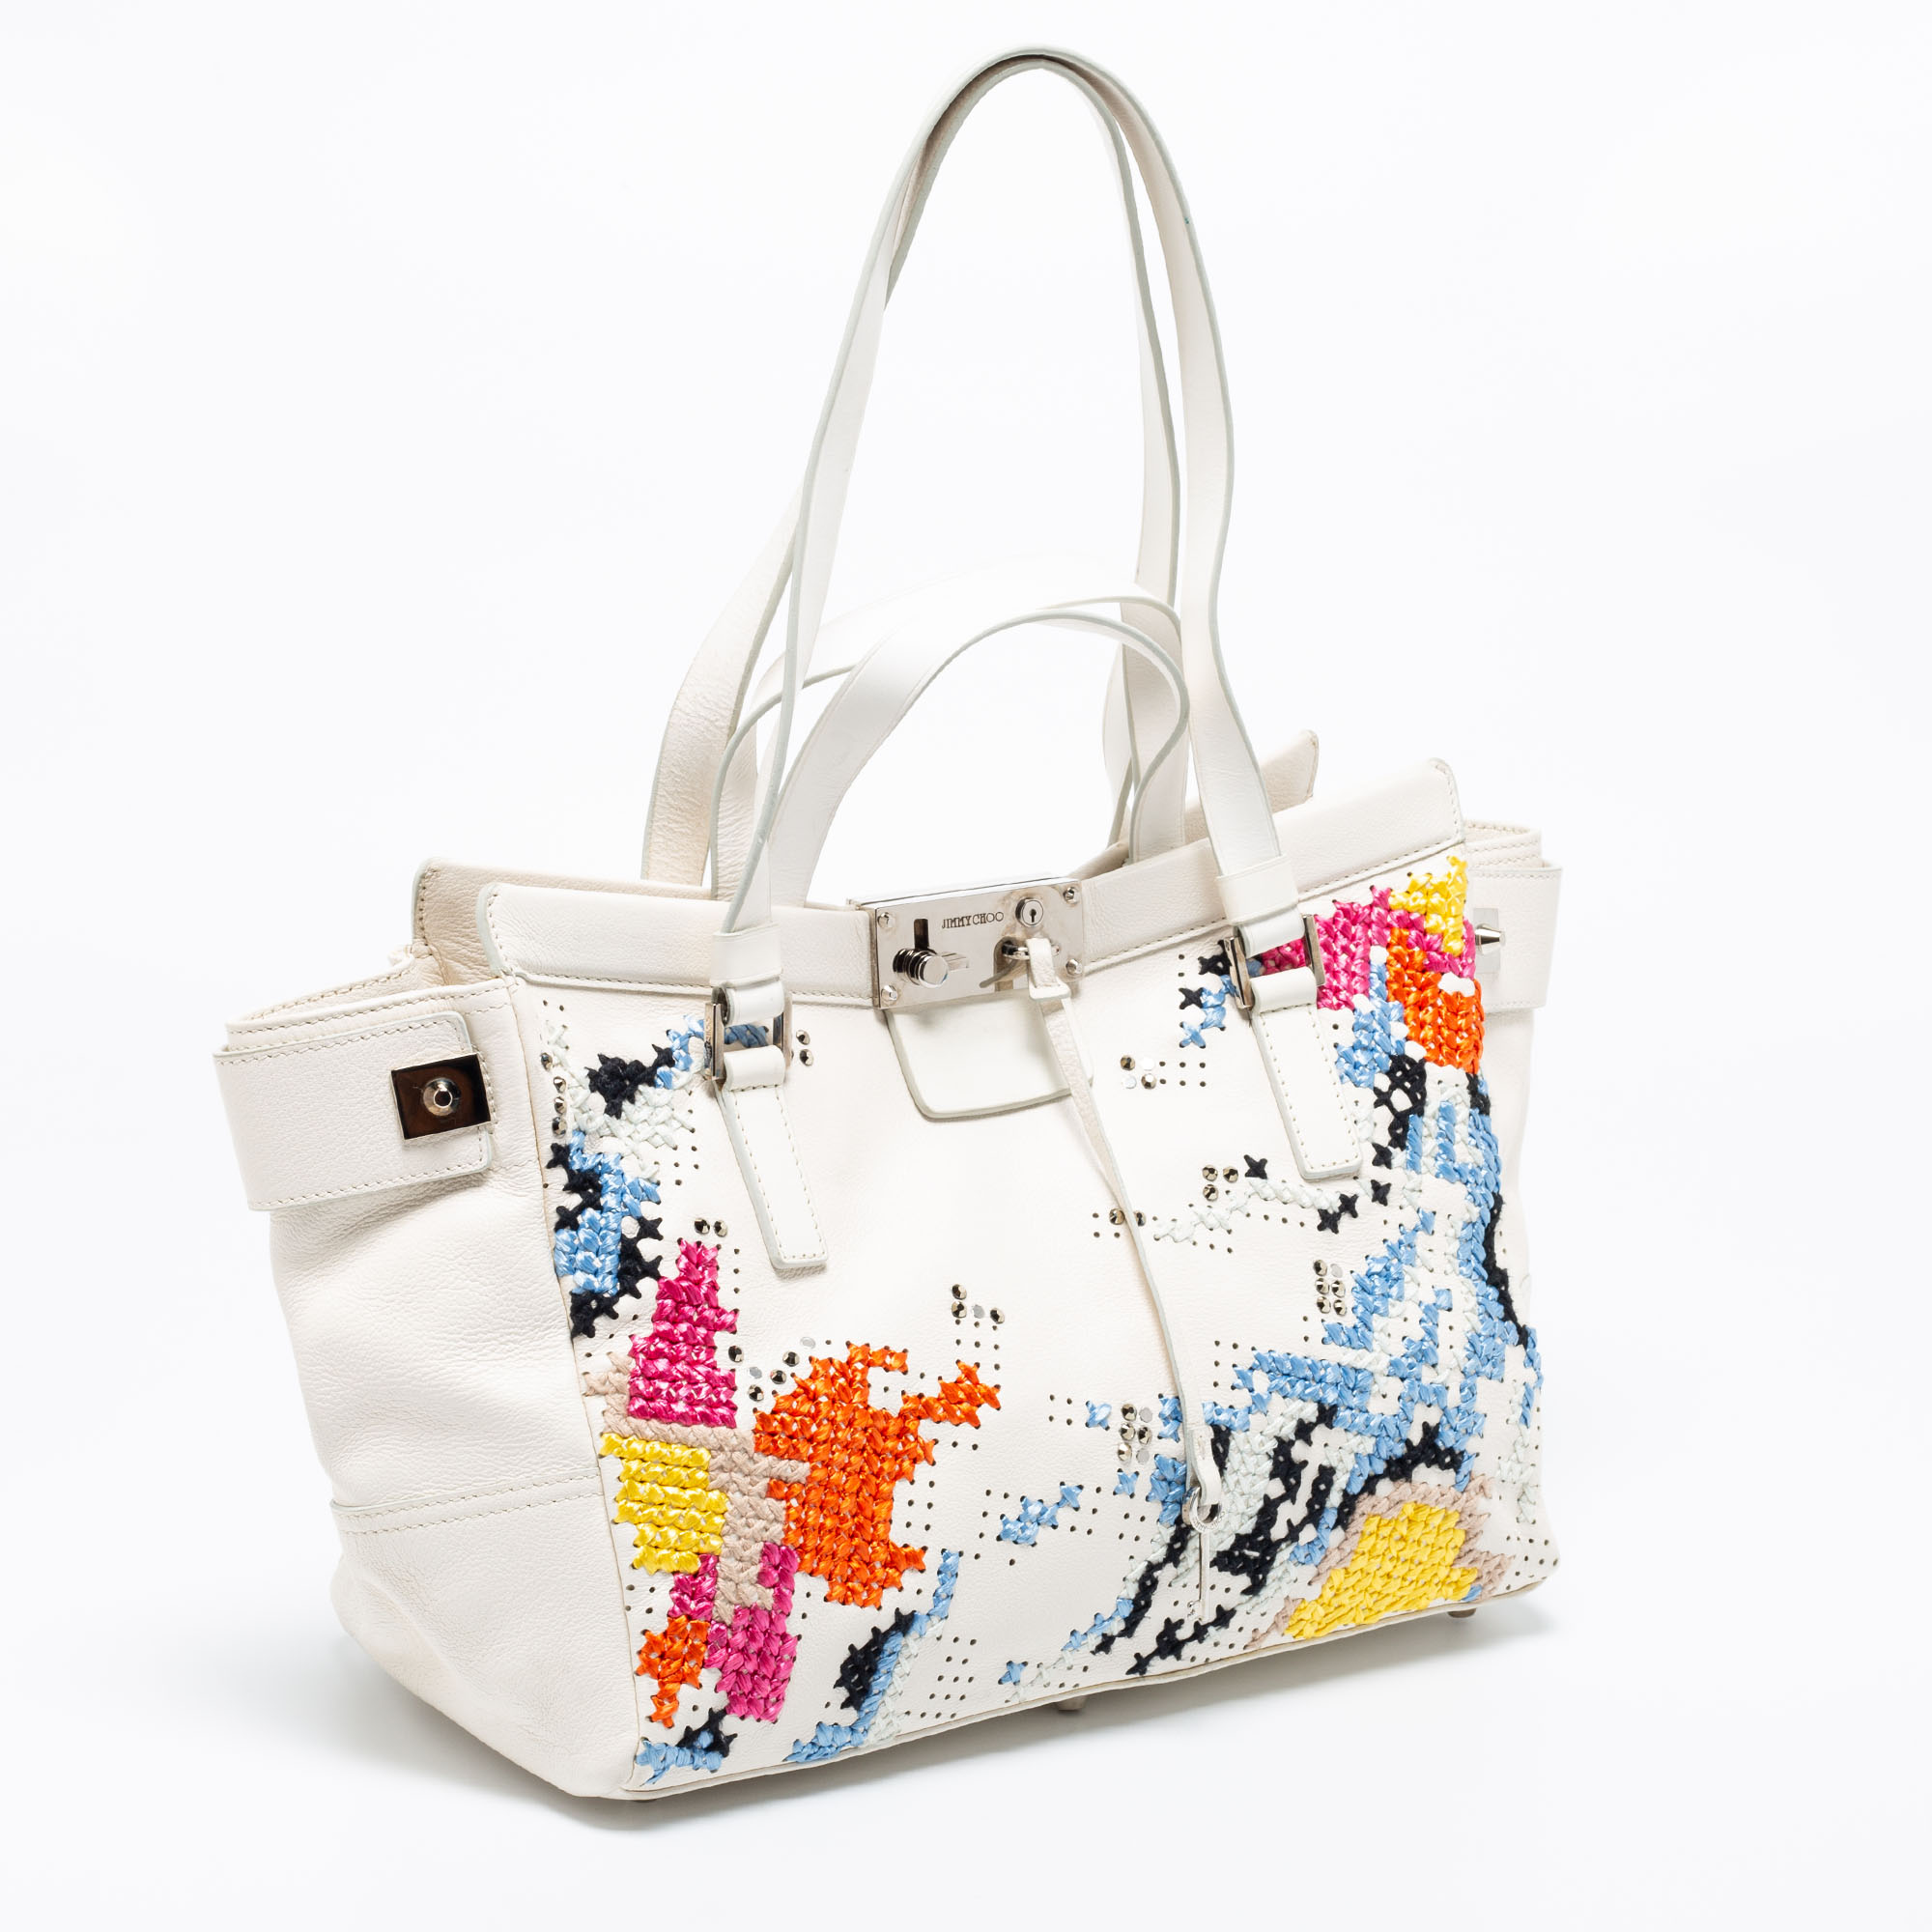 Jimmy Choo White Cross Stitched/Embellished Leather Tote